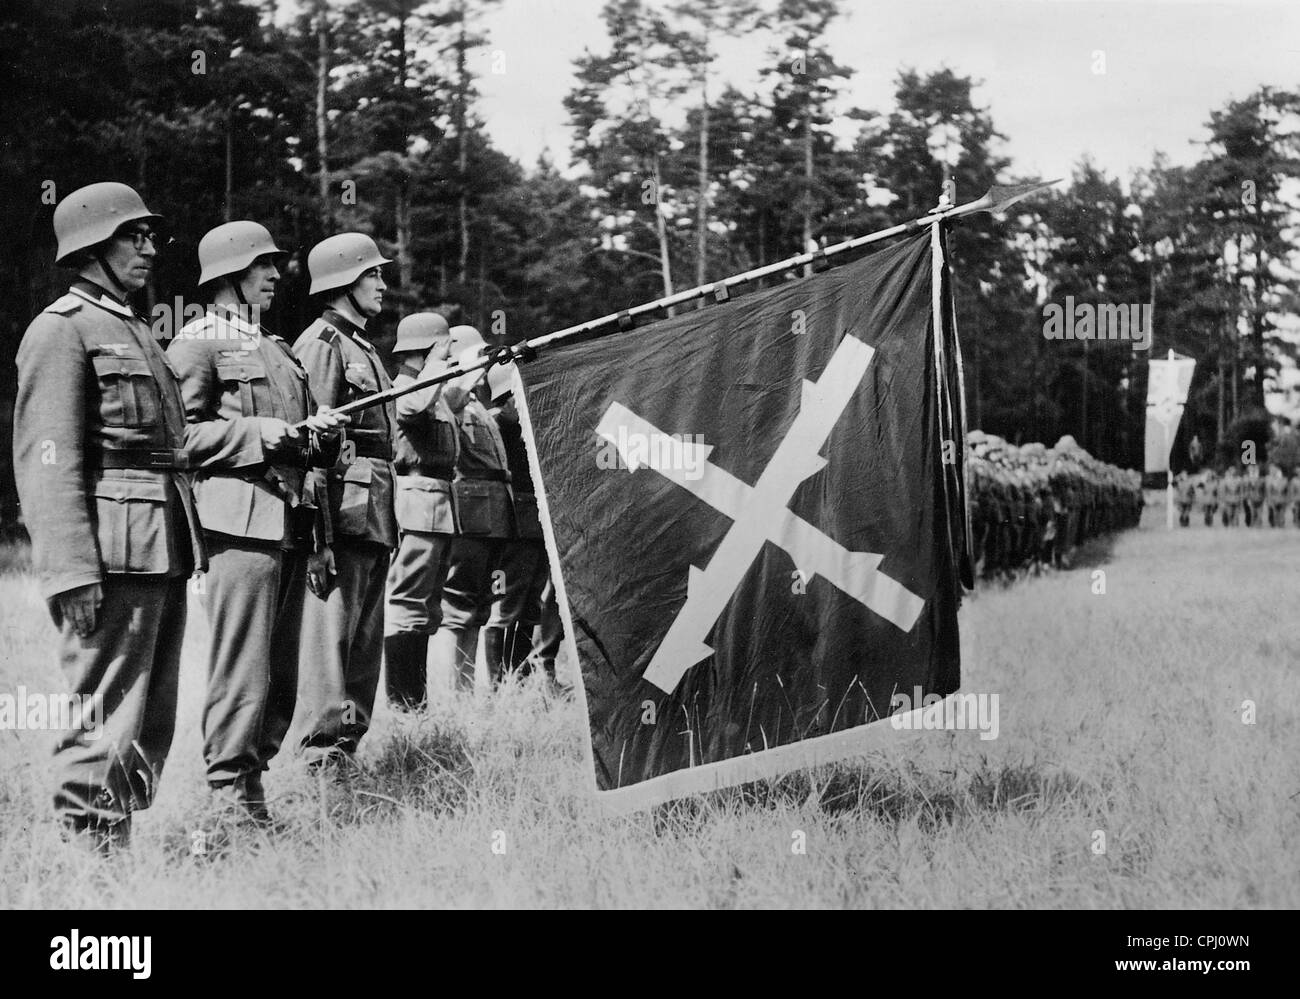 Swearing in ceremony of Walloon volunteers to the Waffen SS, 1941 Stock Photo